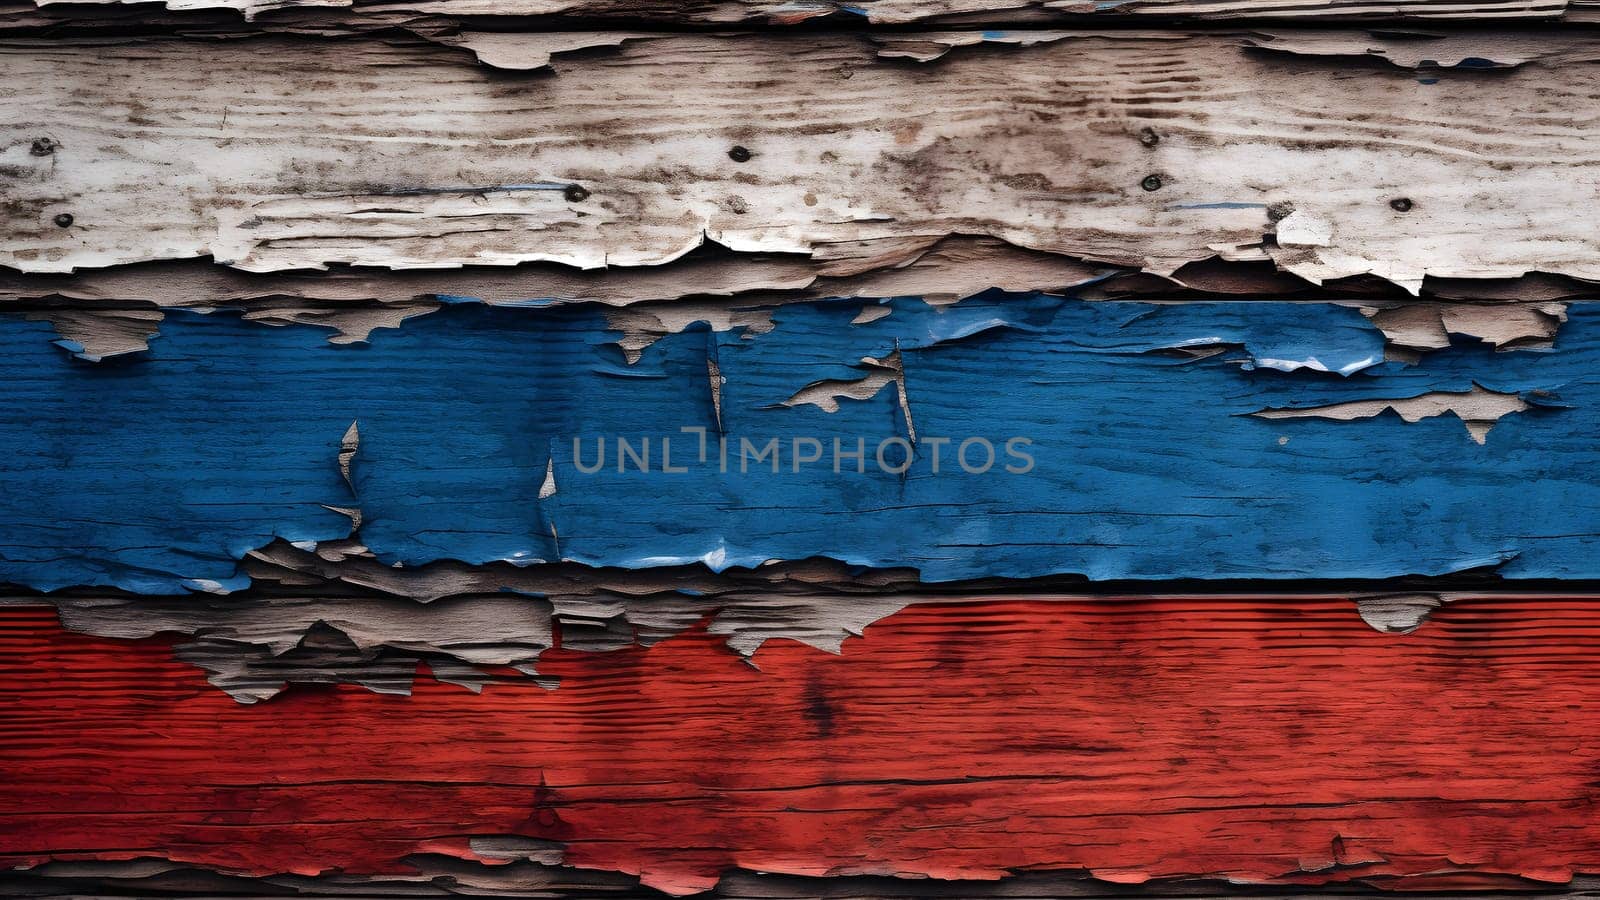 Russian flag colored barn wall, decayed old flaking paint on rotten wood surface, neural network generated image by z1b